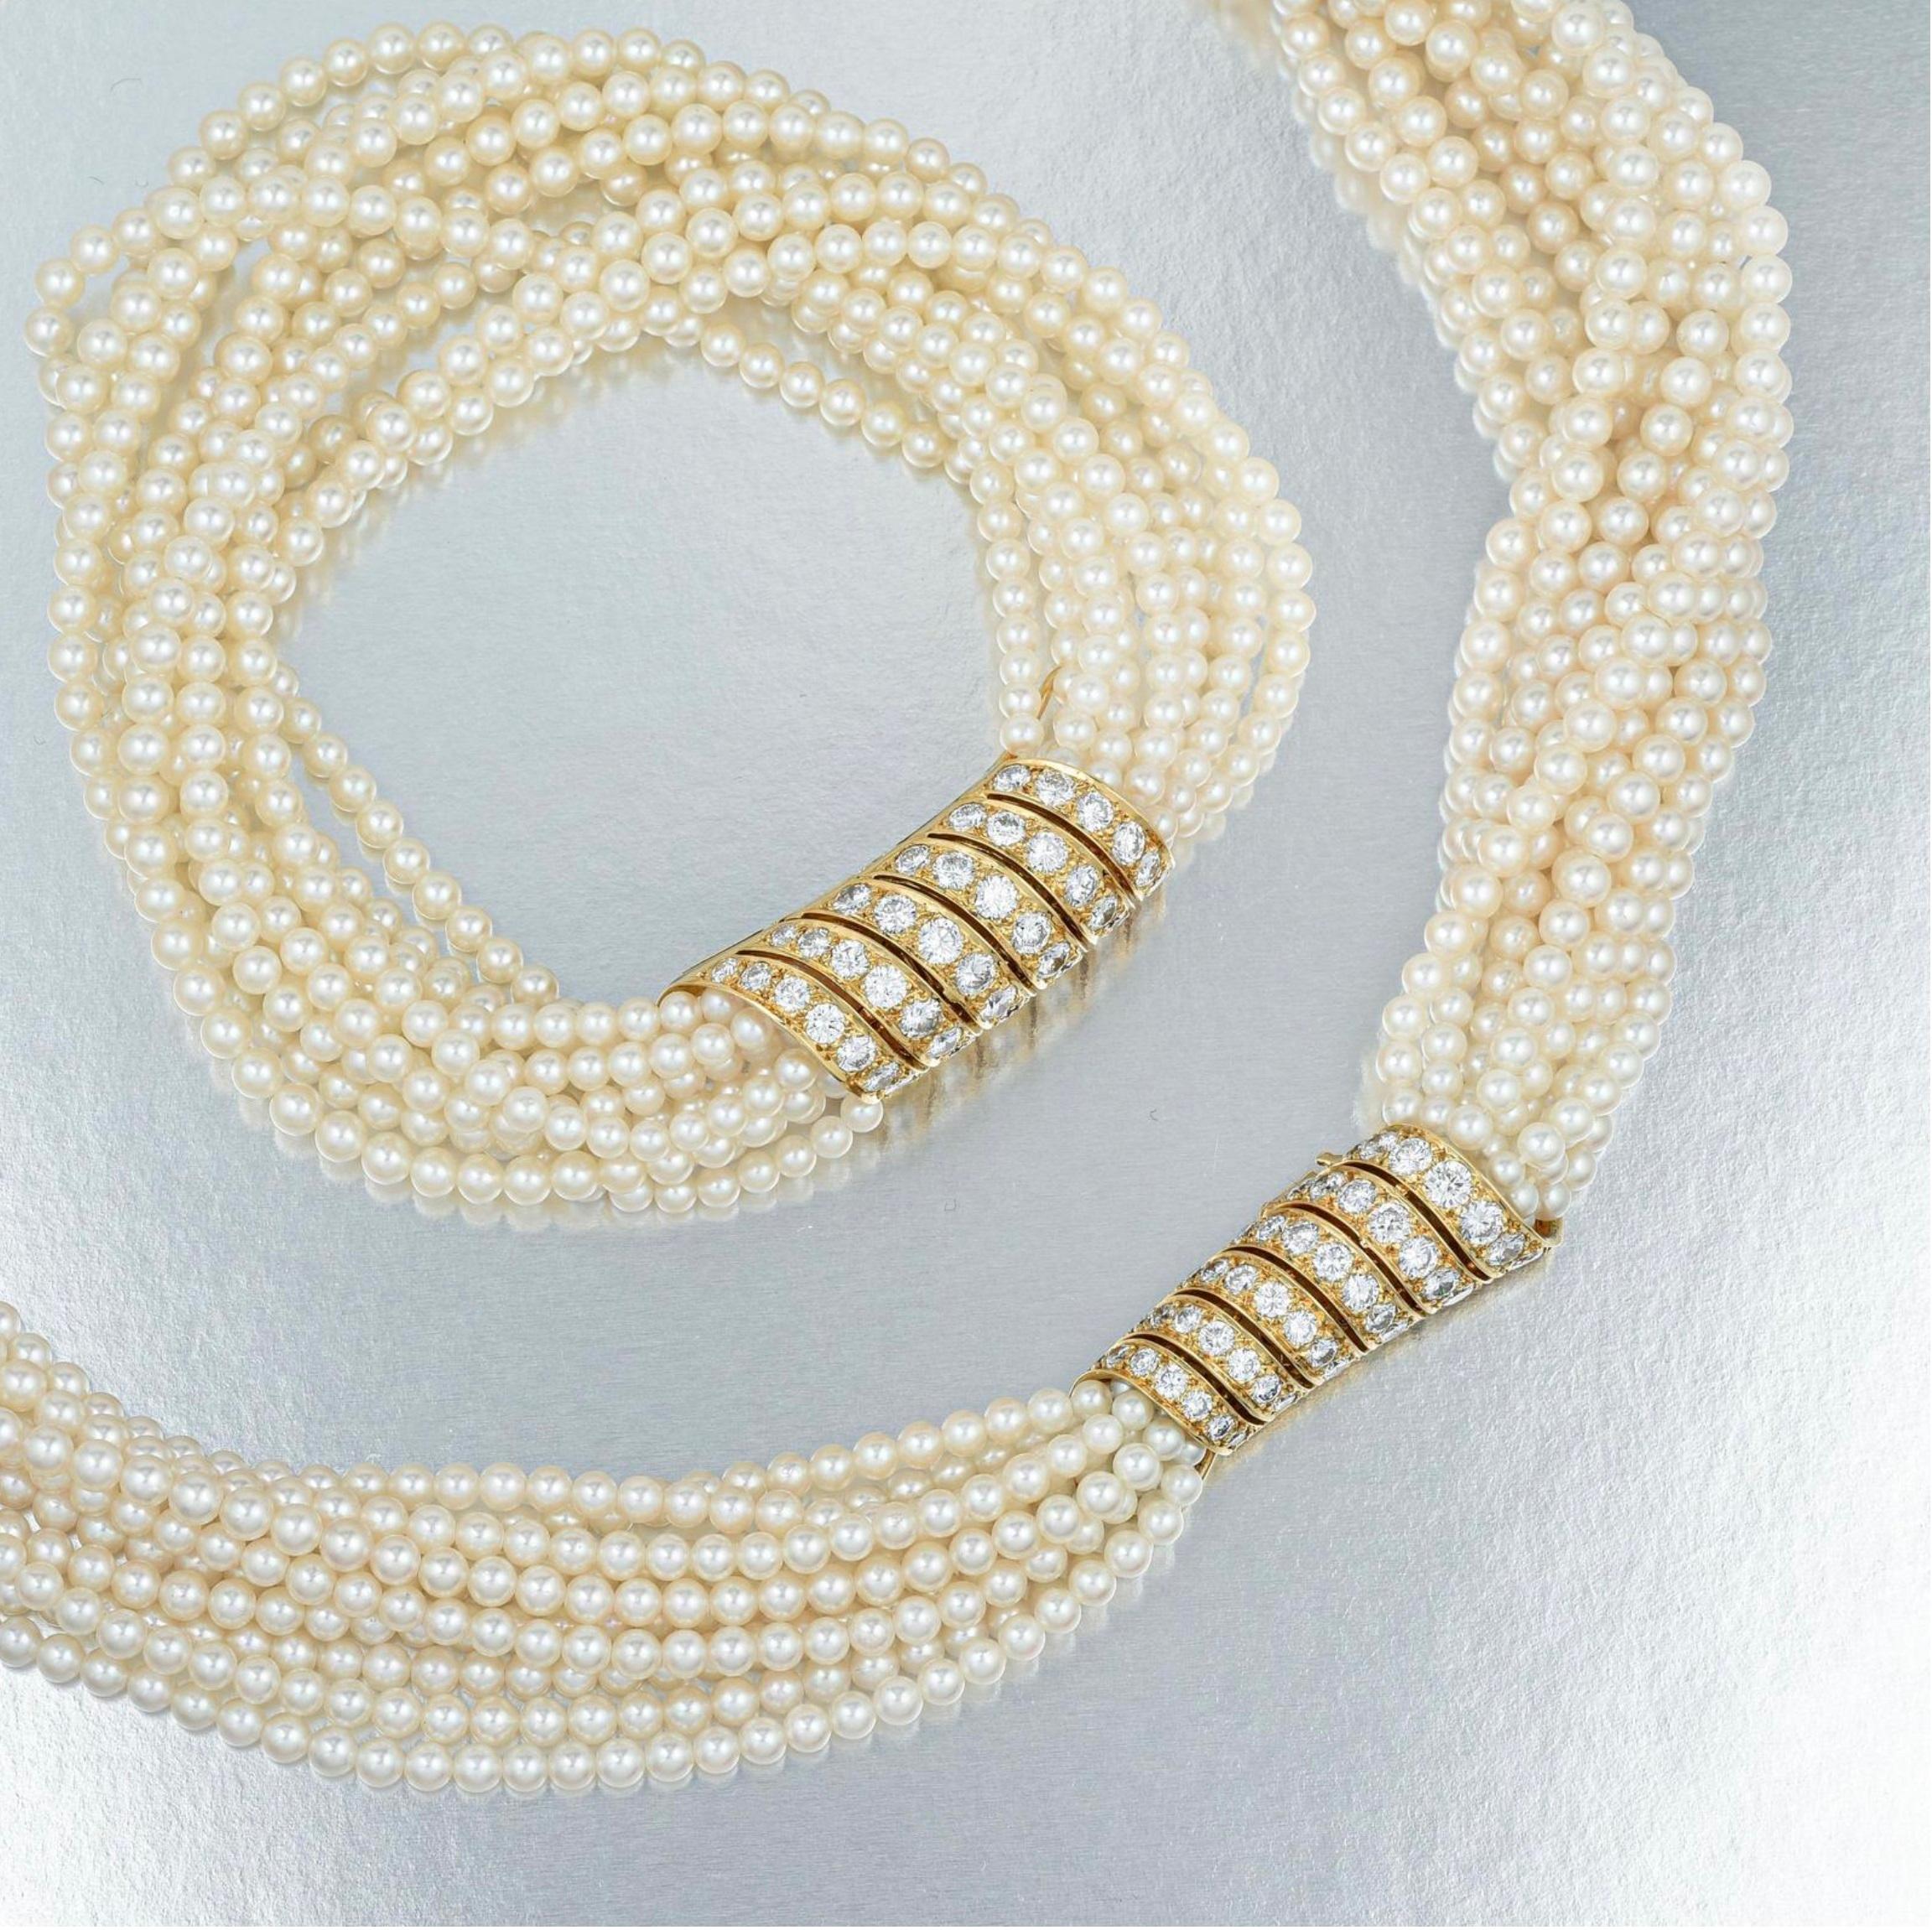 18k gold; set with round brilliant-cut diamonds weighing approx. 8.45 cts, most with F-G color and VVS- VS Clarity; with cultured seed pearls measuring approx 3.00 - 3.50 mm in diameter; necklace measures 18-1/8 inches; bracelet measures 8-1/8